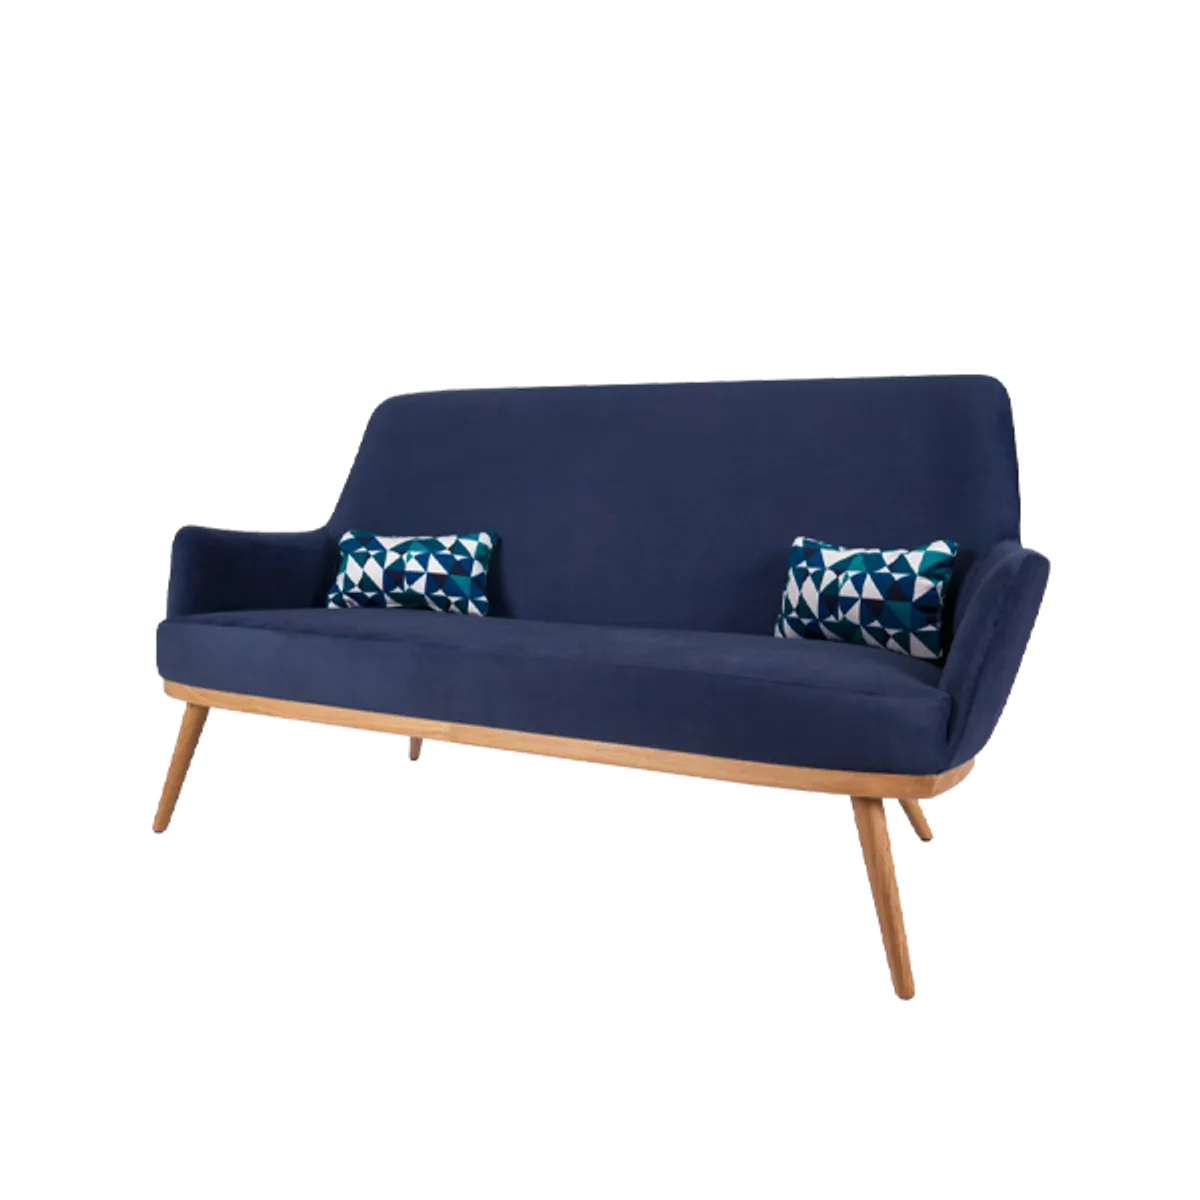 Pud sofa Inside Out Contracts